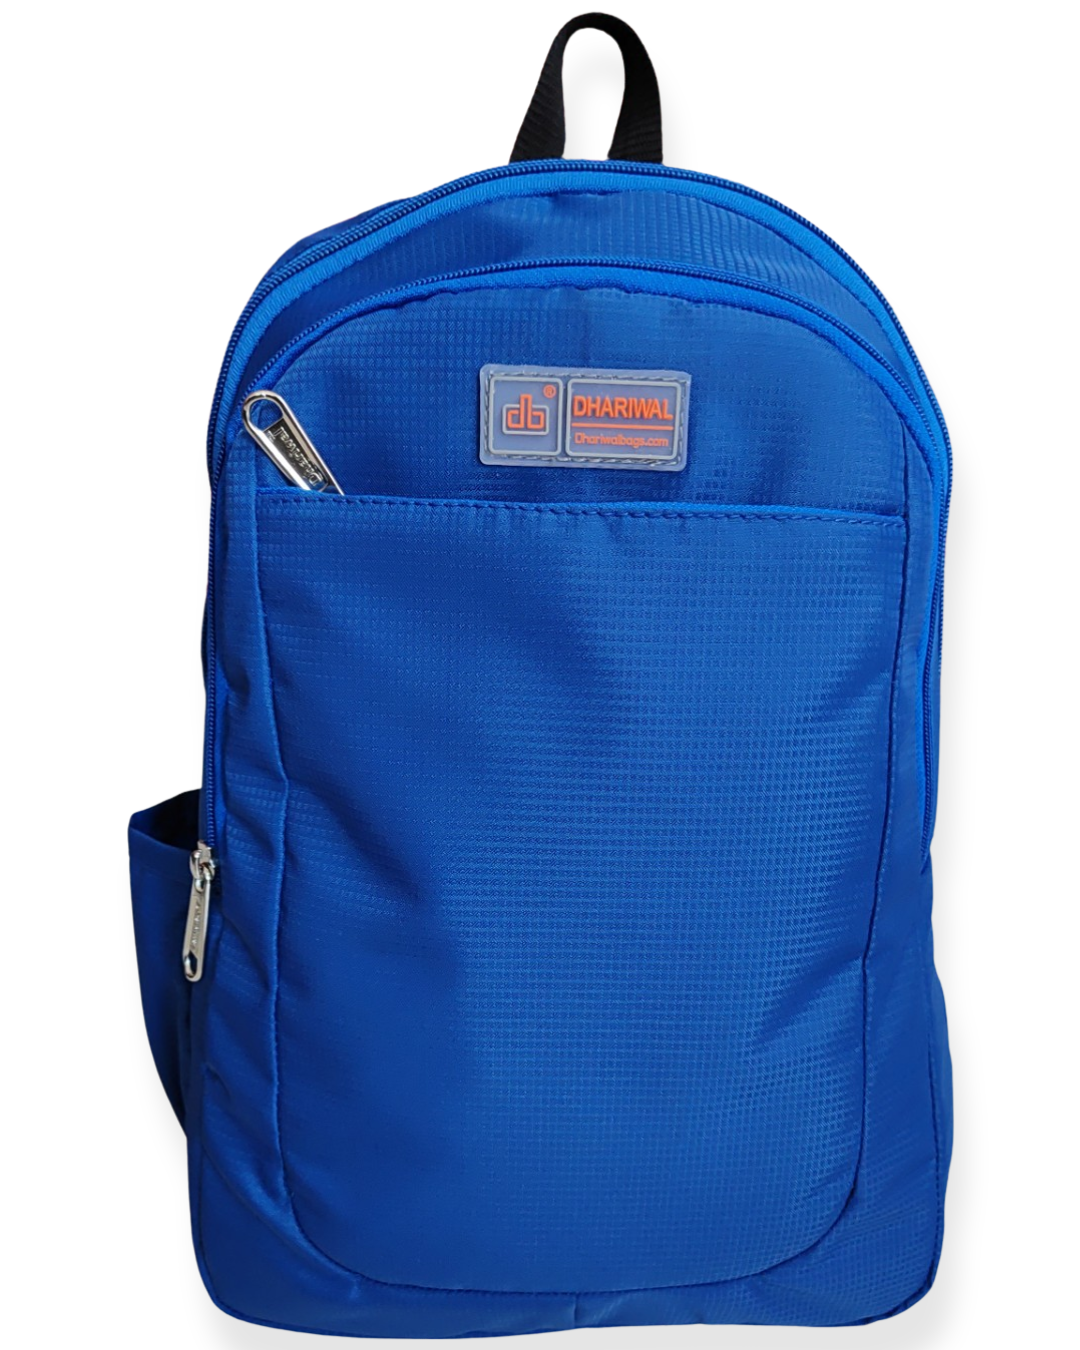 Dhariwal 19L Water Resistant Dual Compartment Backpack BP-236